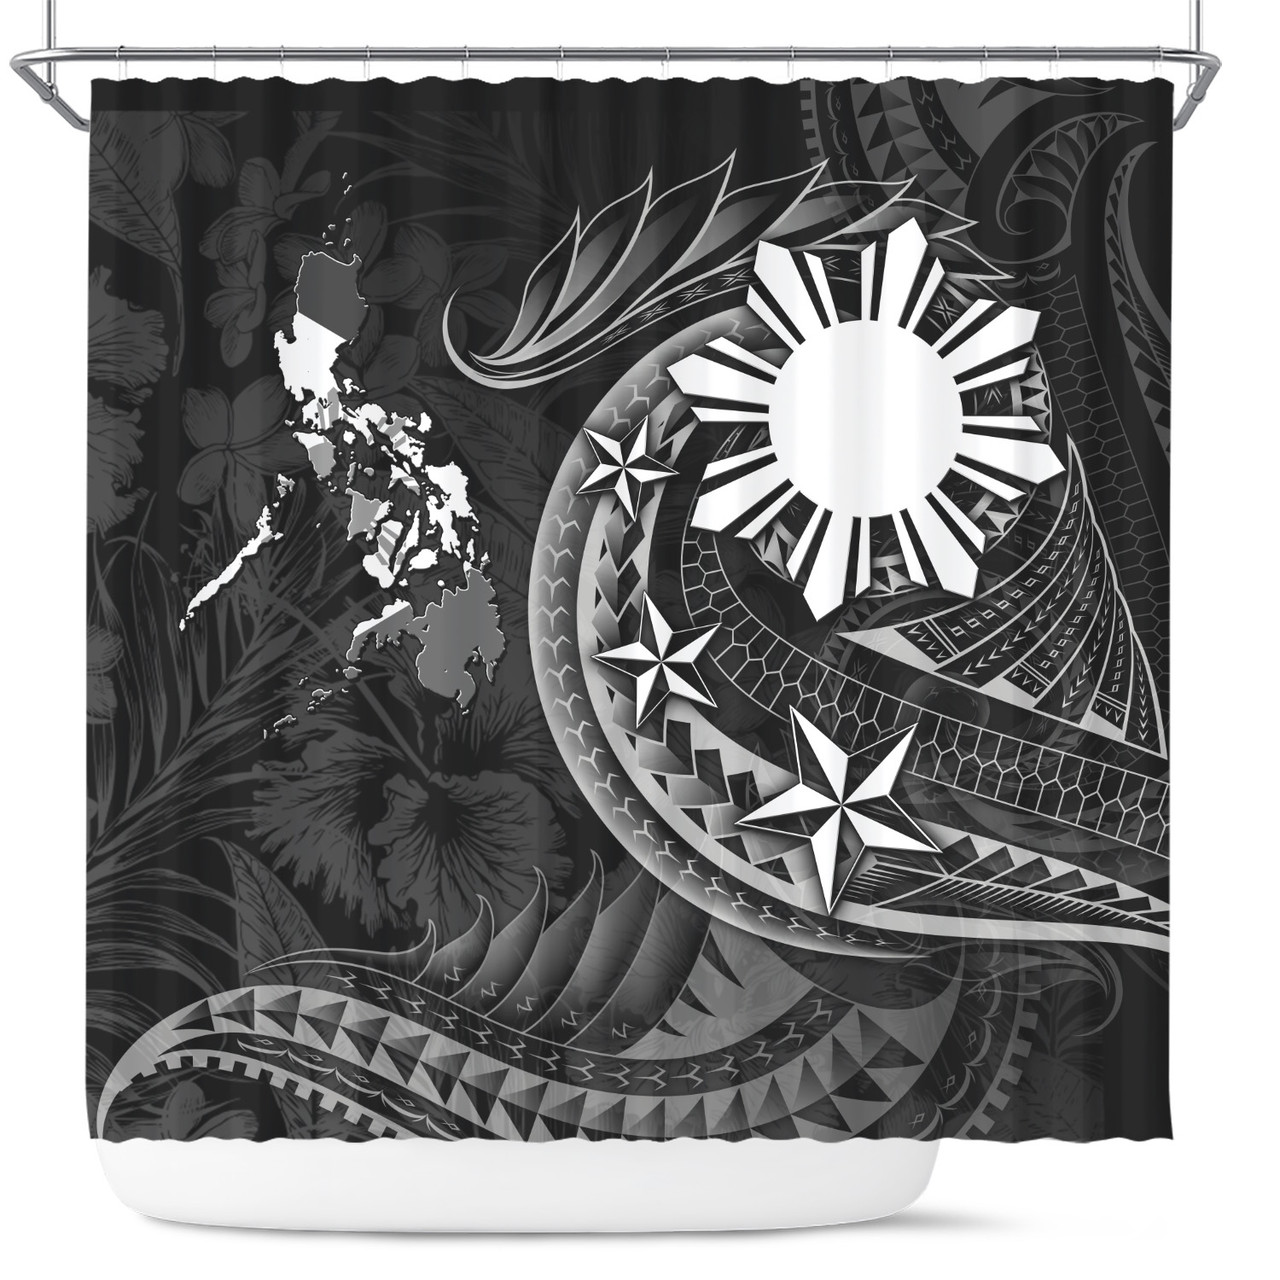 Philippines Filipinos Shower Curtain Philippines Sun Tribal Patterns Tropical Flowers Curve Style